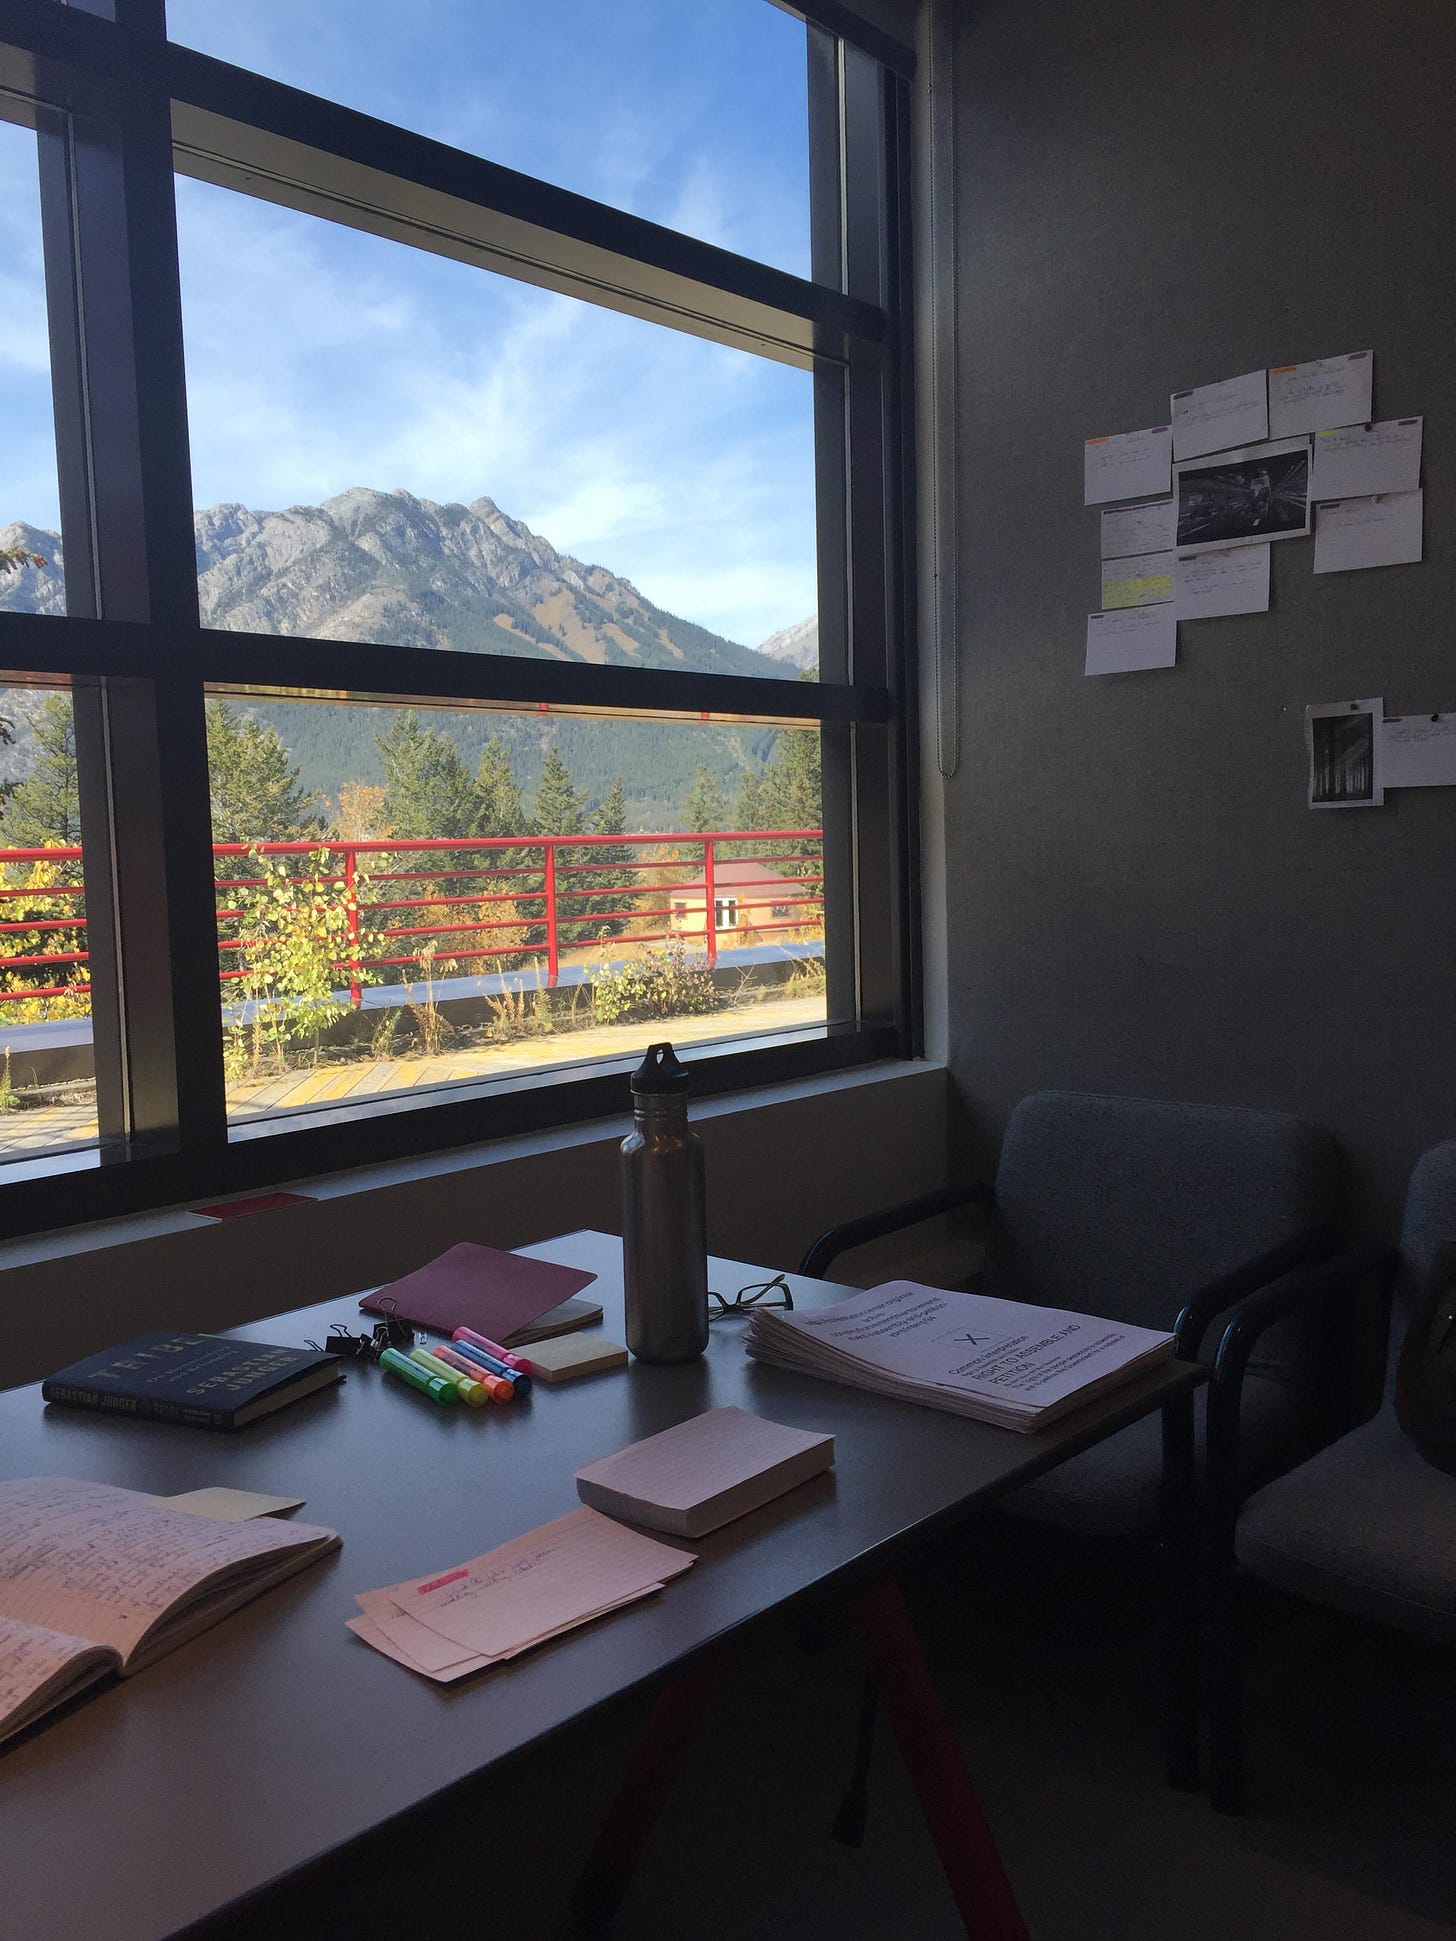 A desk with papers and highlighters, index cards, and books, in front of a window looking out toward the Canadian Rockies